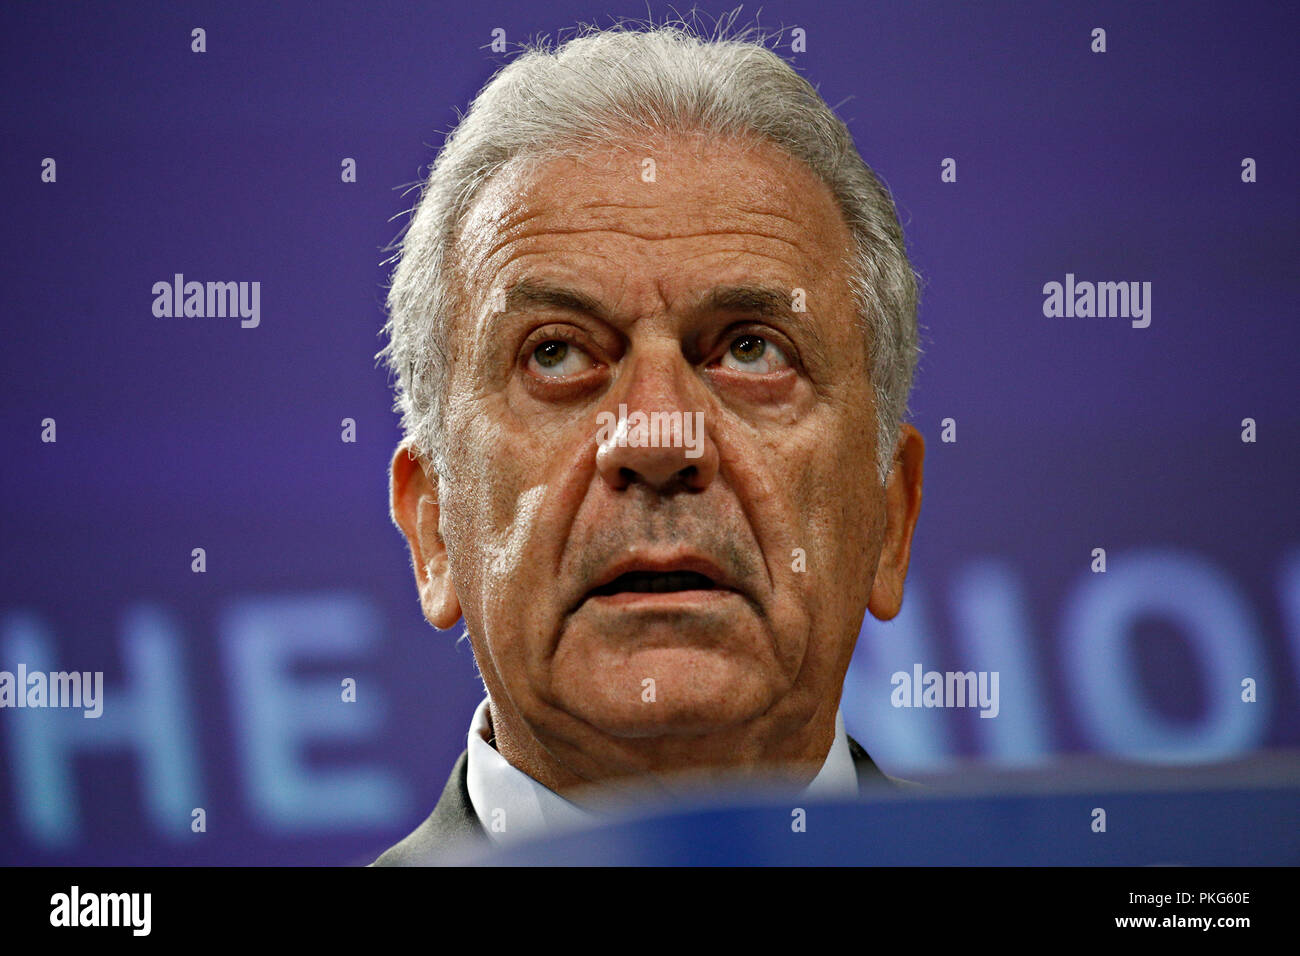 Brussels, Belgium. 13th Sept. 2018.EU Commissioner for Migration Dimitris Avramopoulos gives a press conference on new measures for stronger EU borders and solidarity on migration. Alexandros Michailidis/Alamy Live News Stock Photo